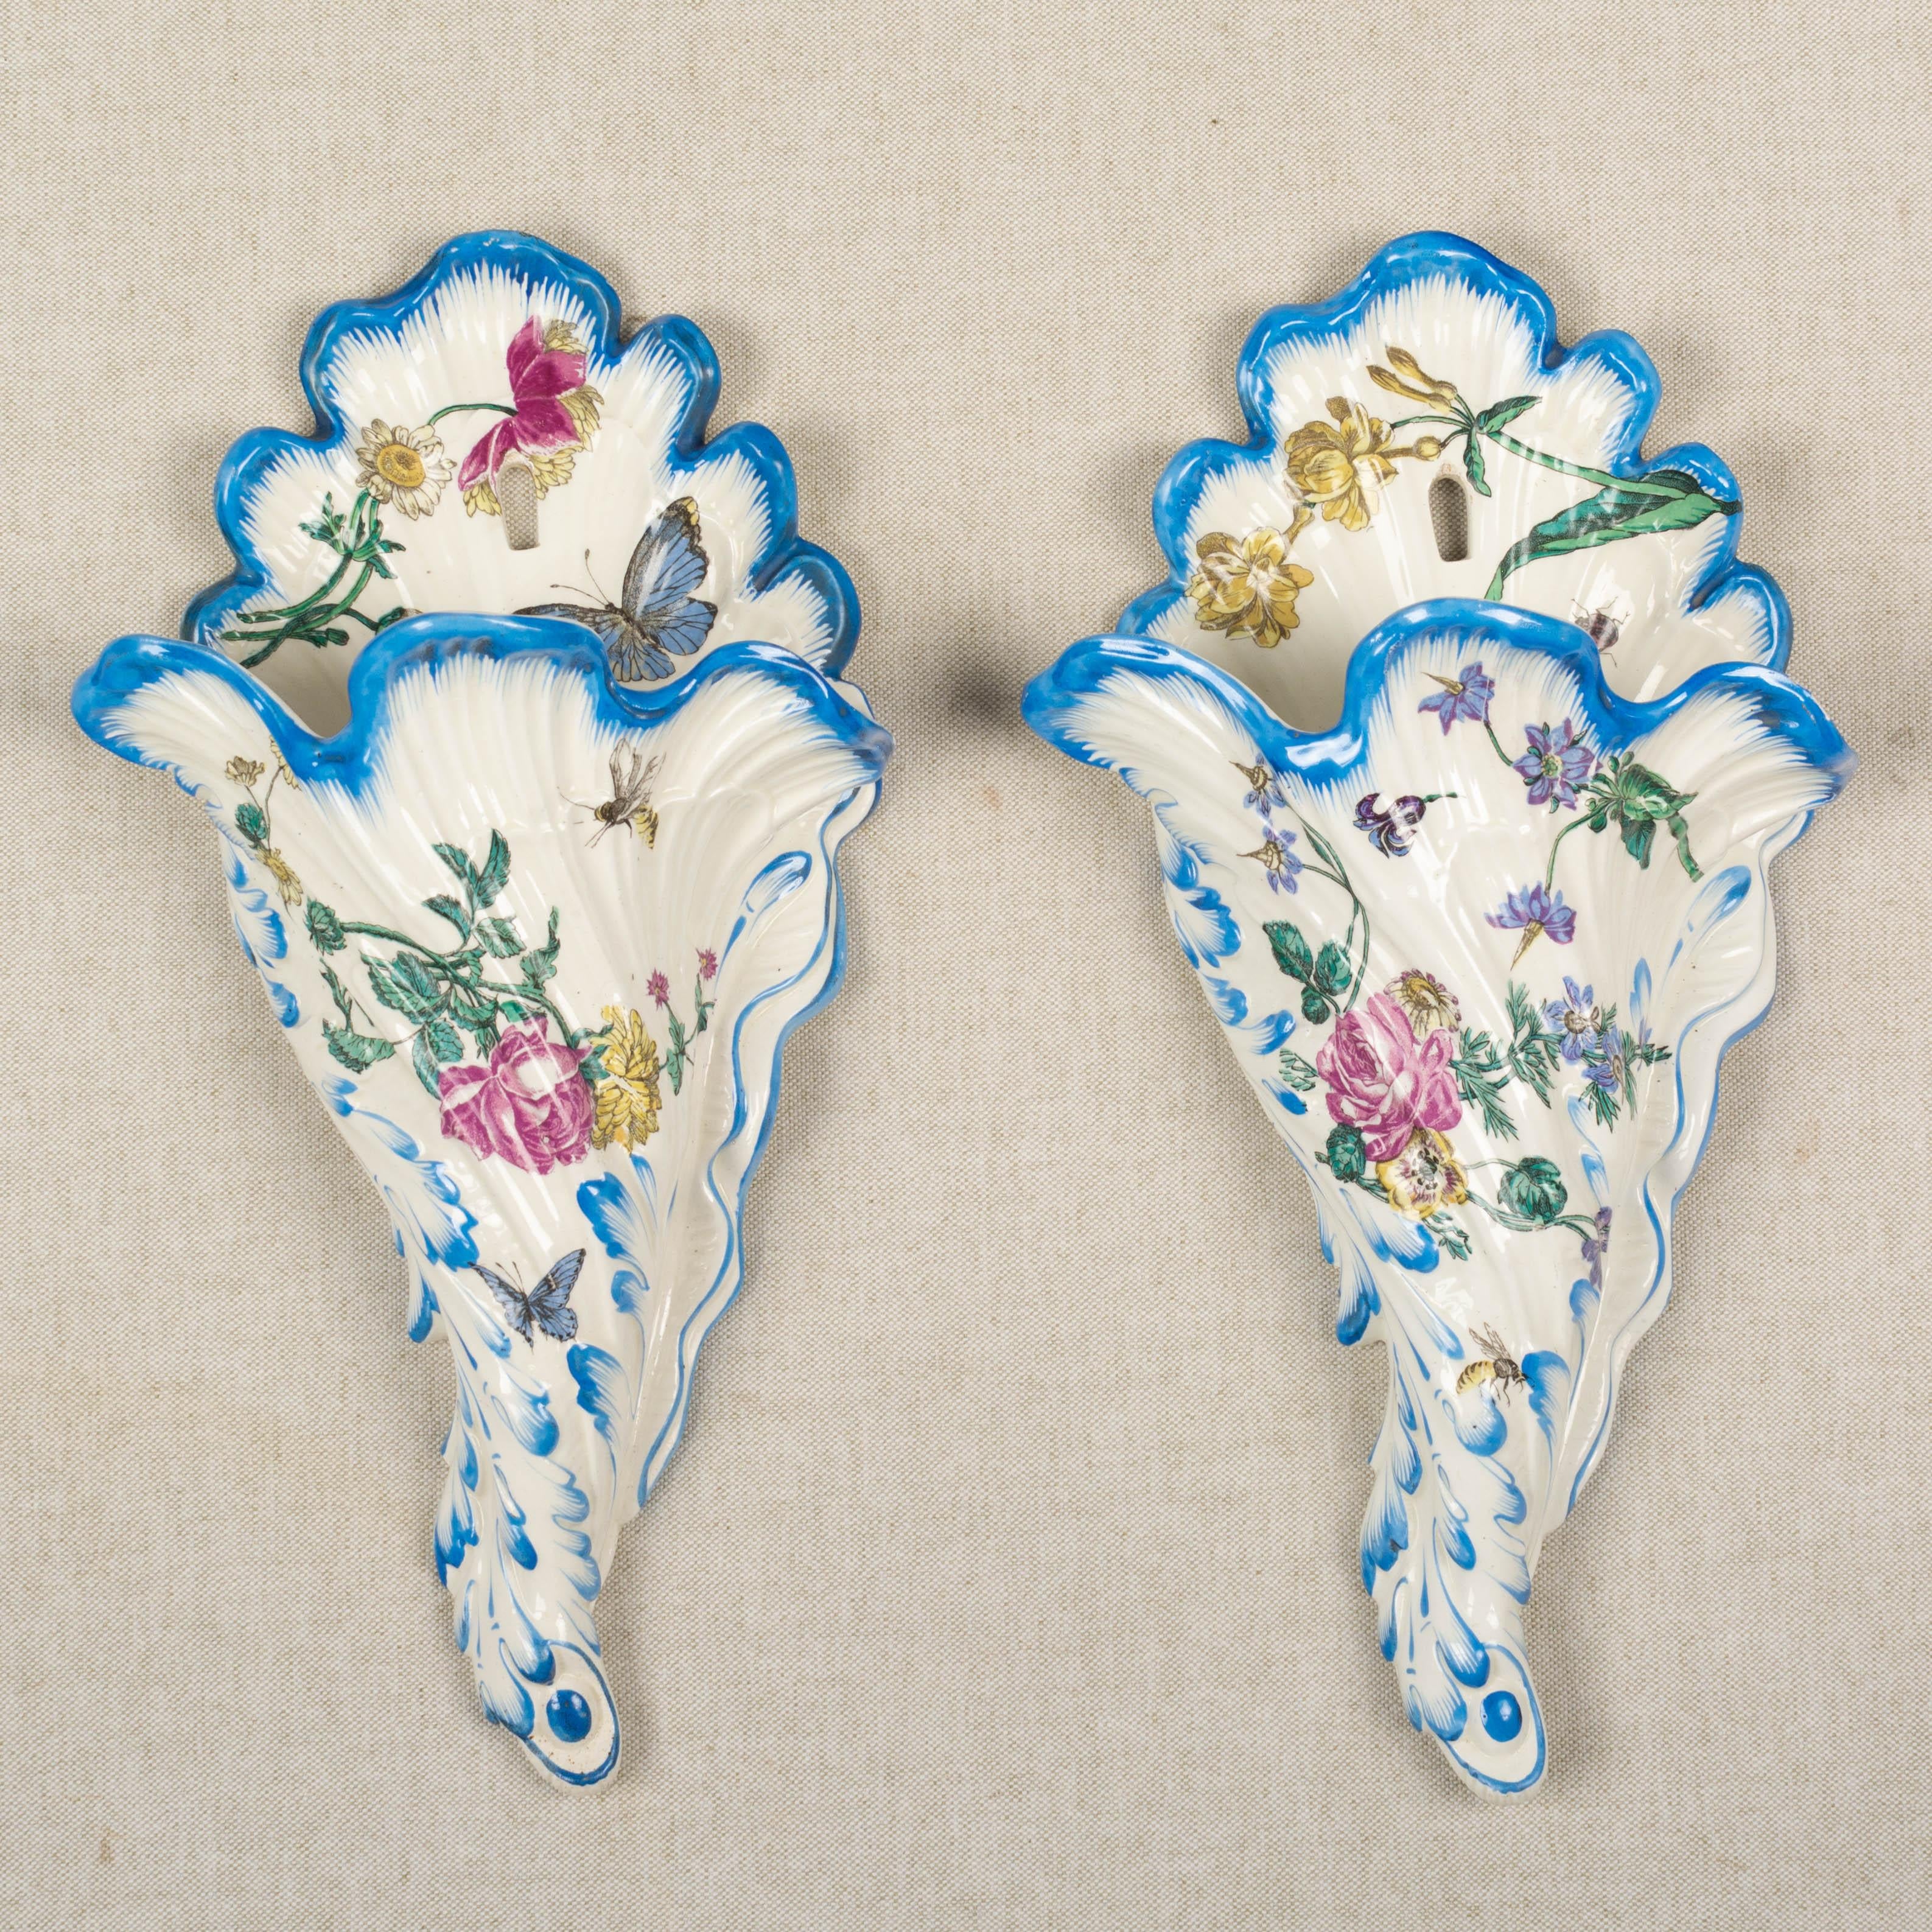 A pair of 19th century French Gien faience urns with hand-painted floral decoration. Nice form with double handles and square pedestal base. Lids with strawberry knobs. Gien stamp on underside, circa 1866. Measures: 16.5